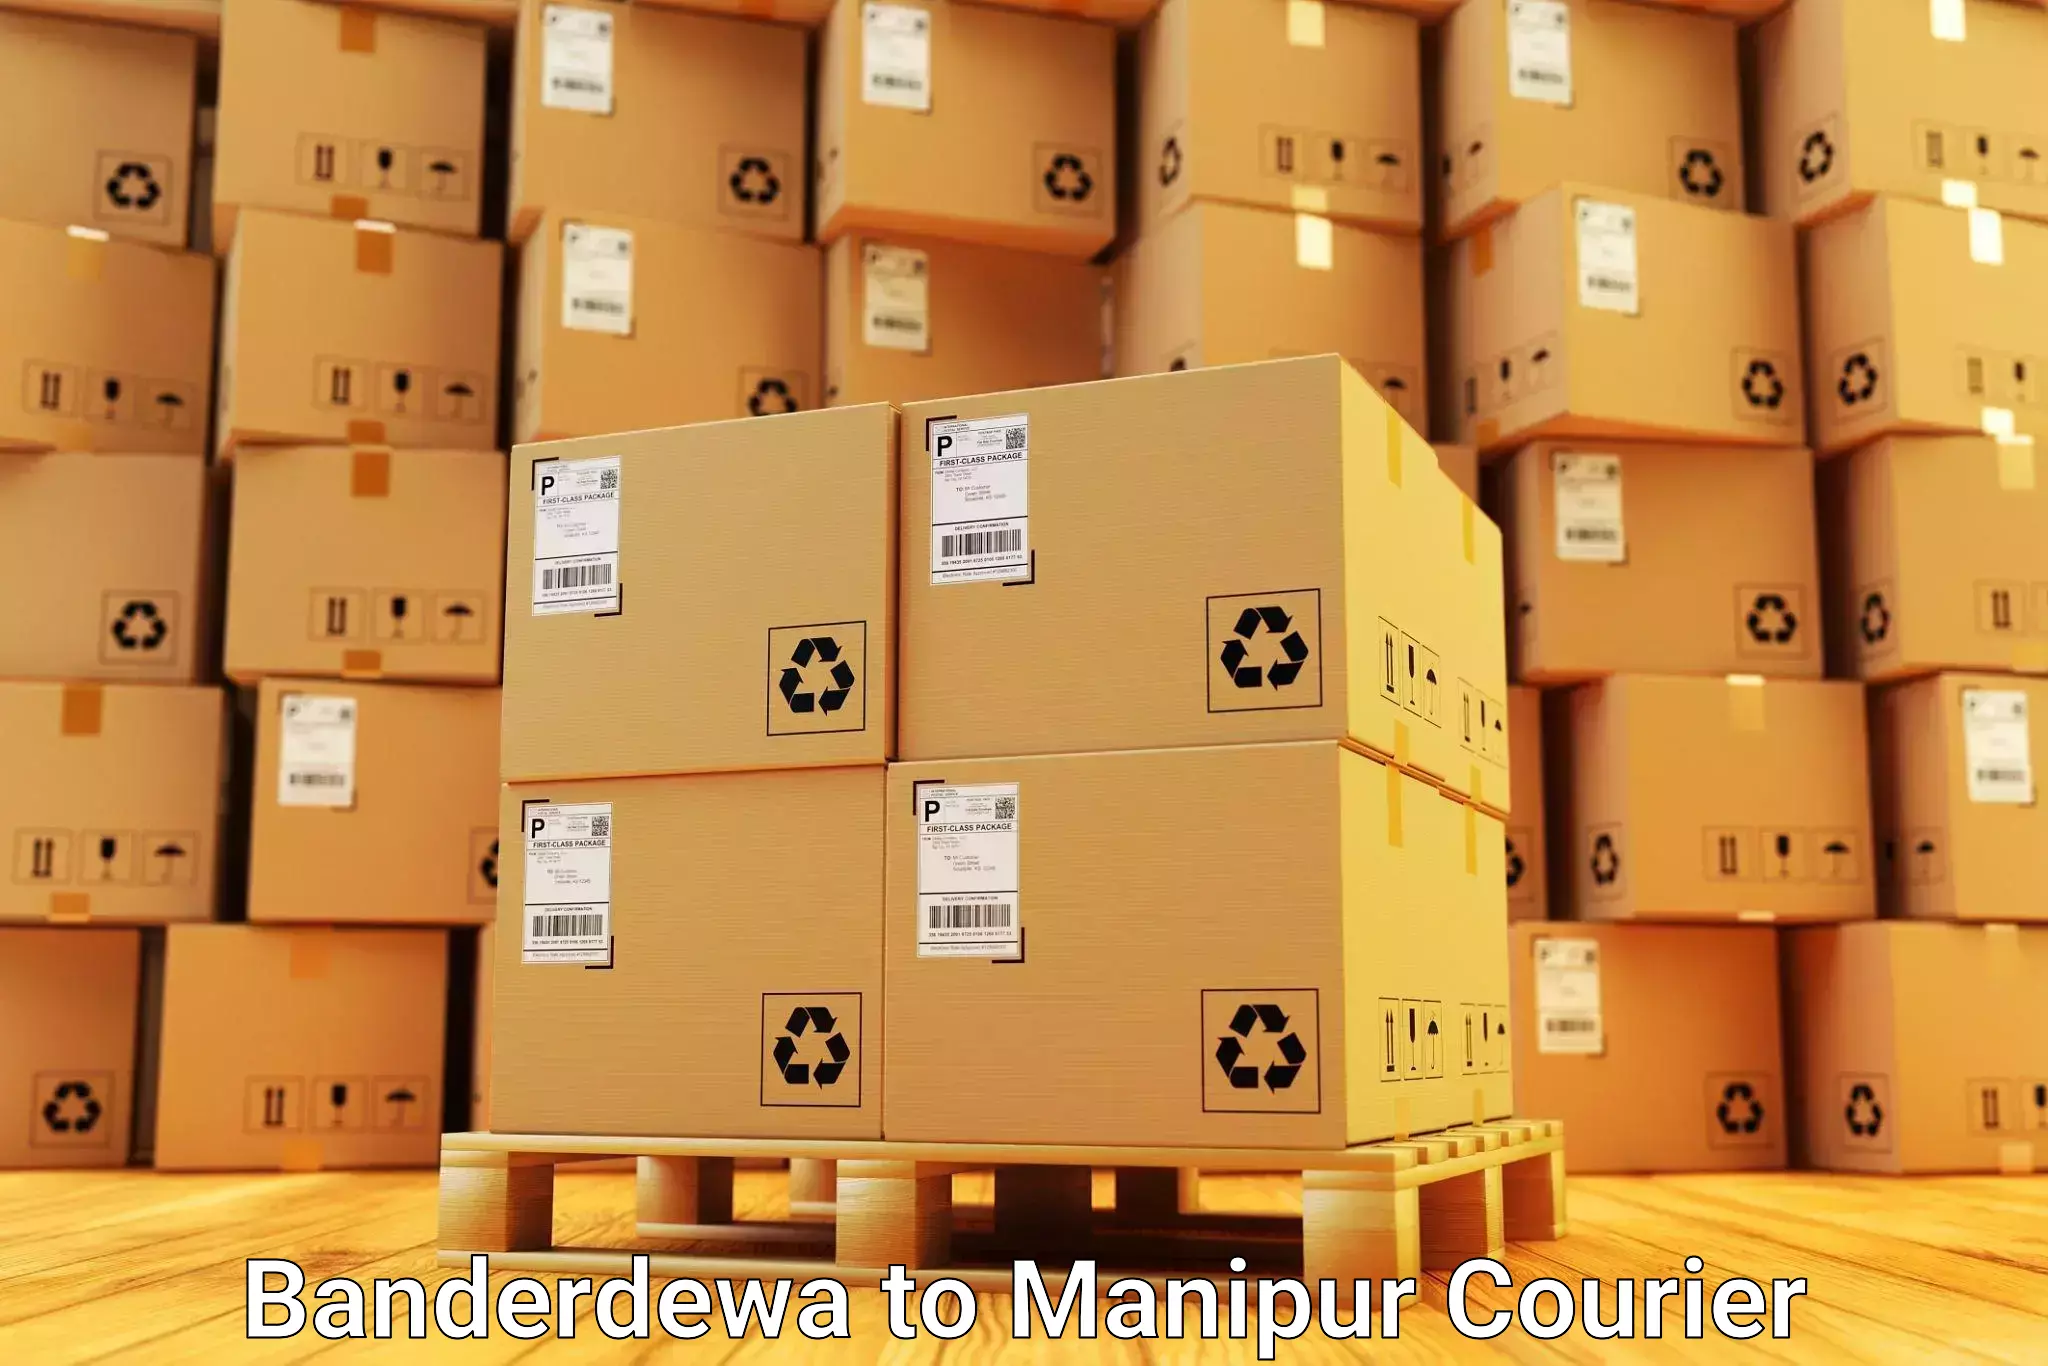 Furniture delivery service Banderdewa to Thoubal